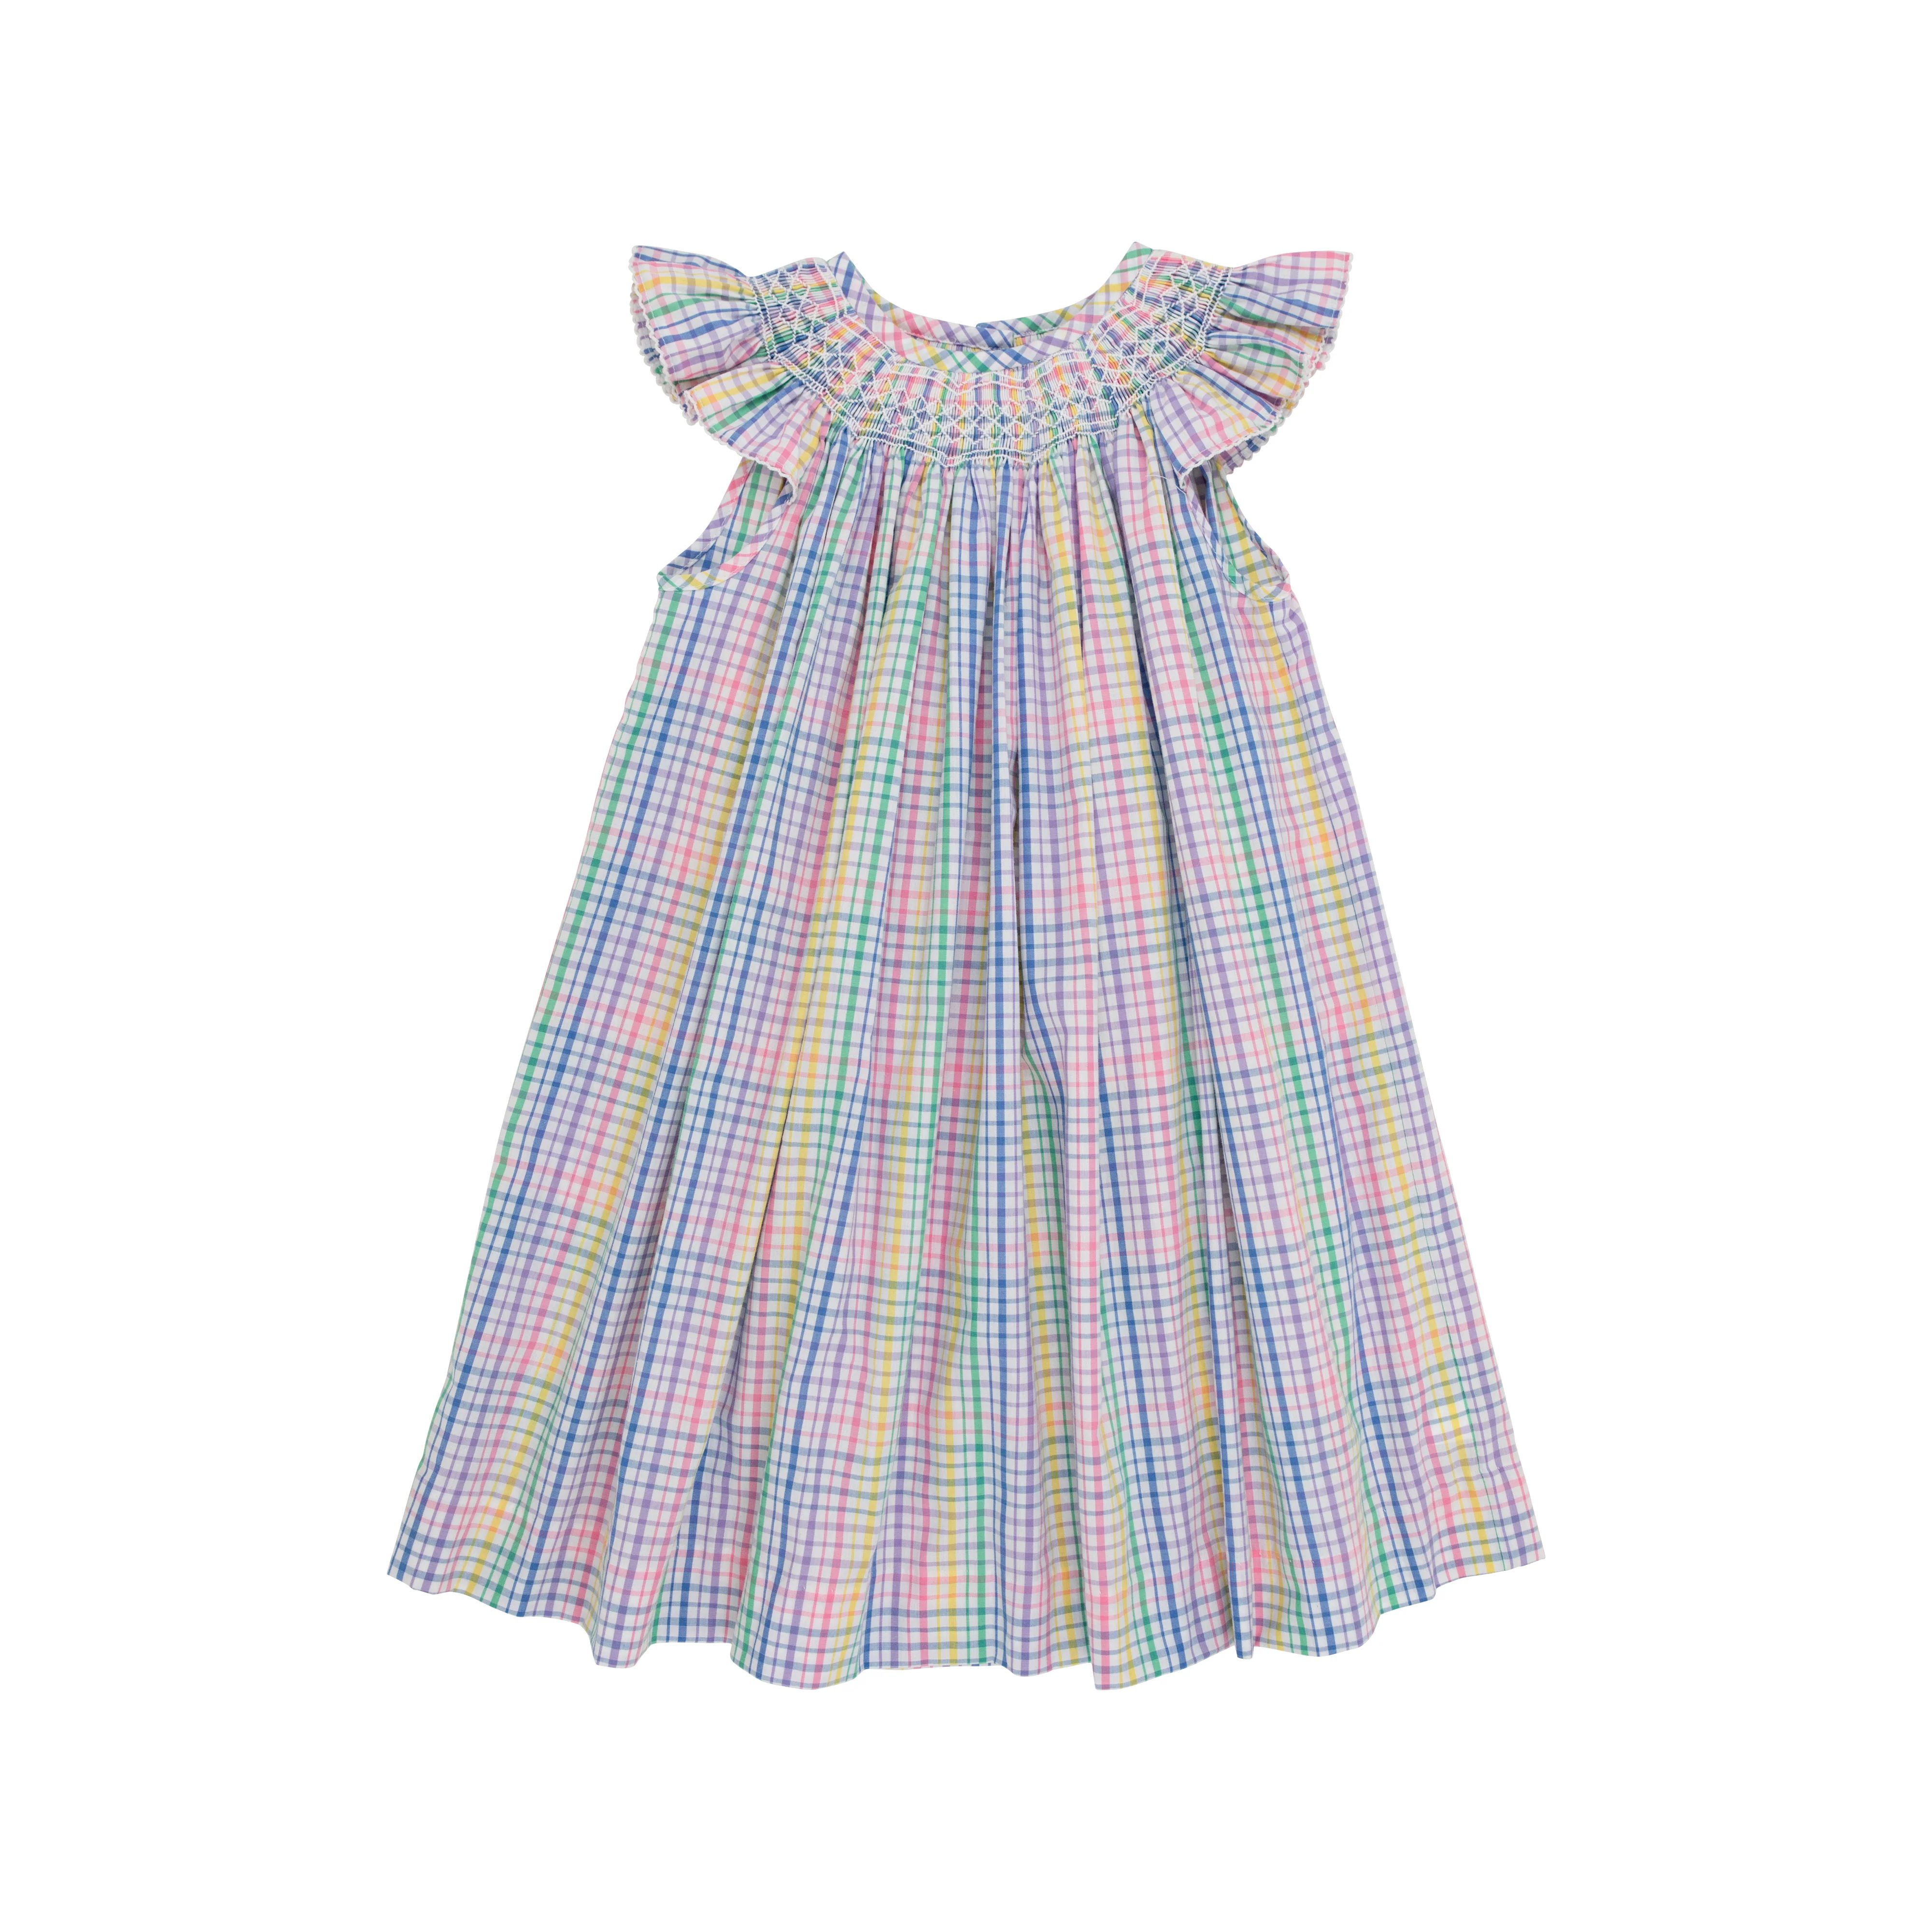 Angel Sleeve Sandy Smocked Dress - Colored Pens Plaid with Worth Avenue White | The Beaufort Bonnet Company